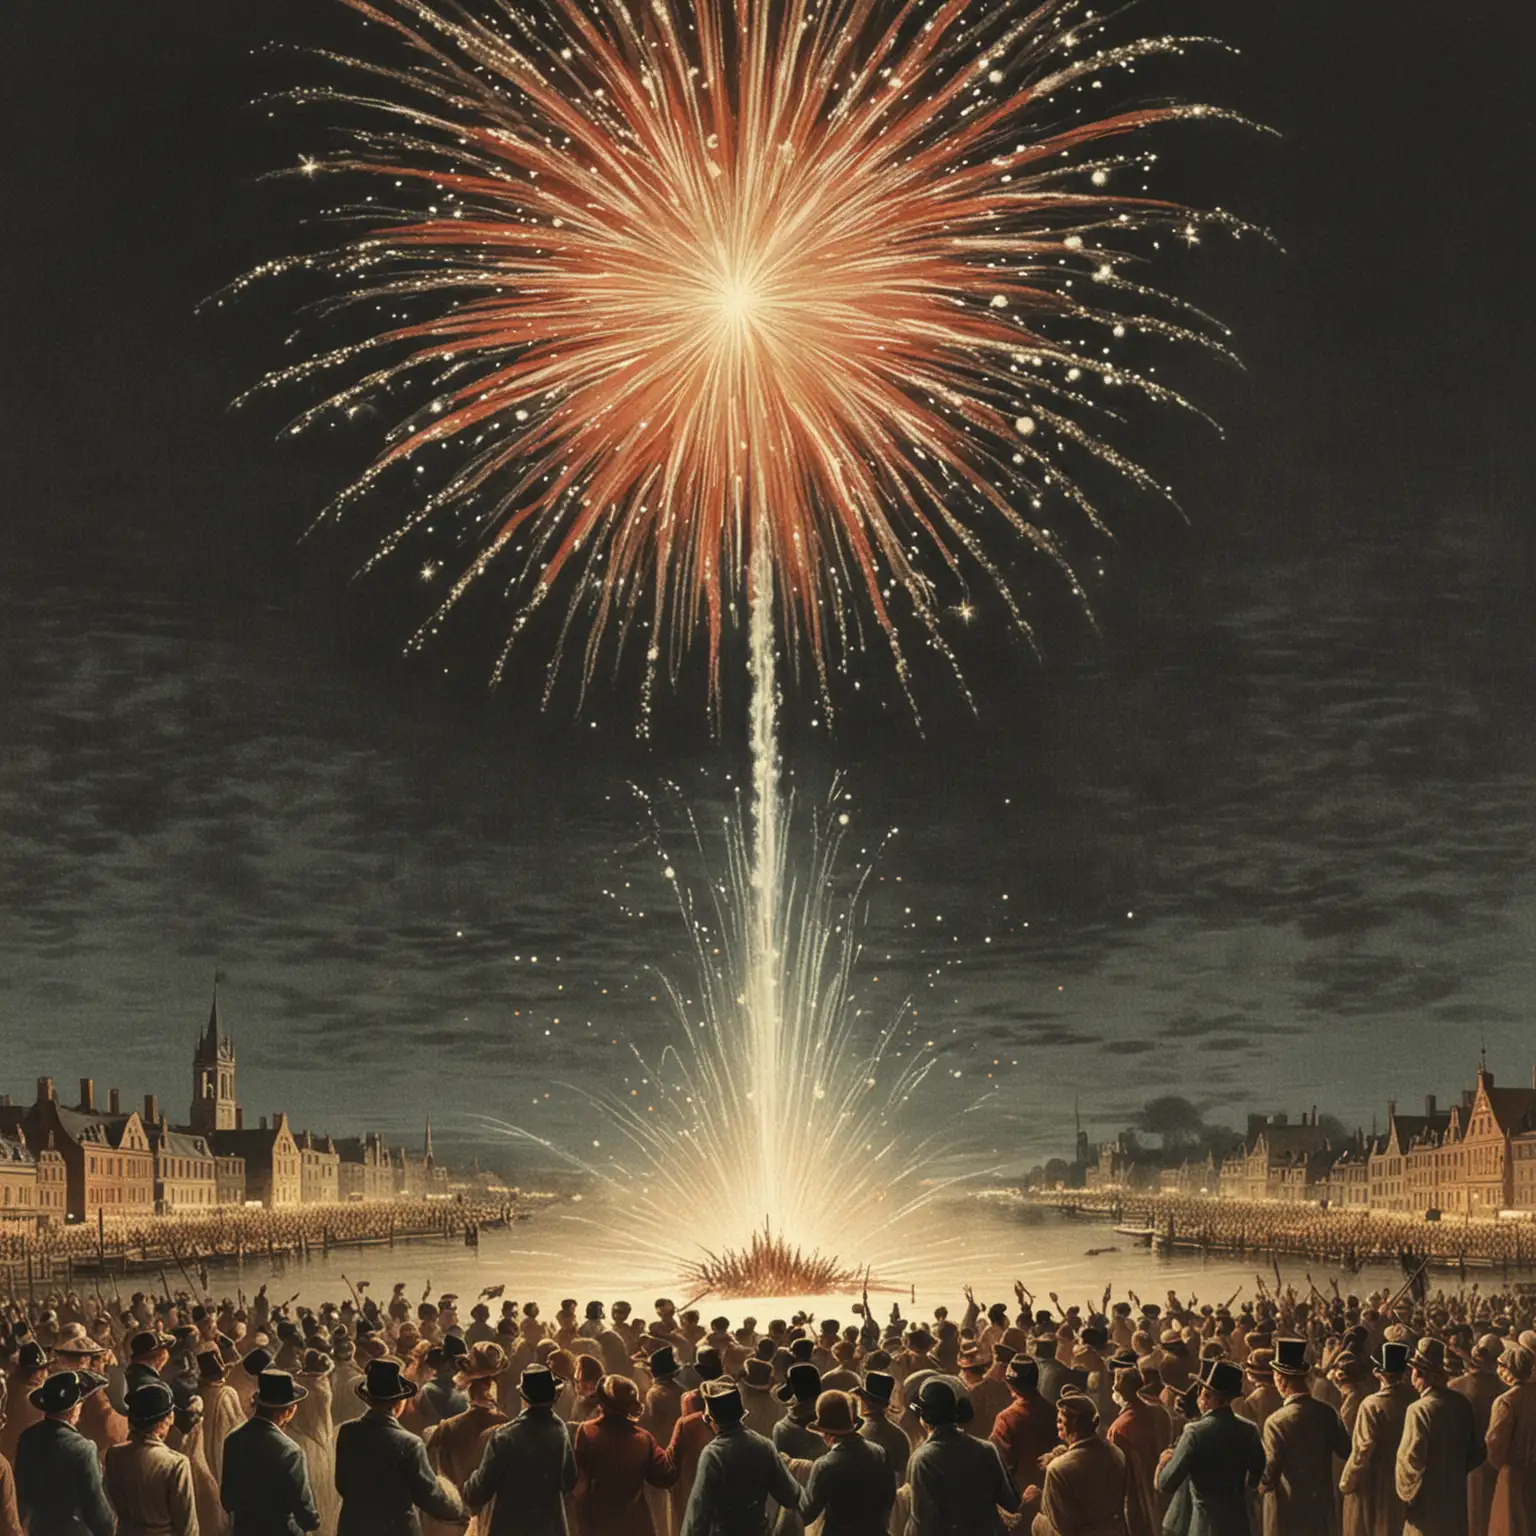 an old illustration of a fireworks display